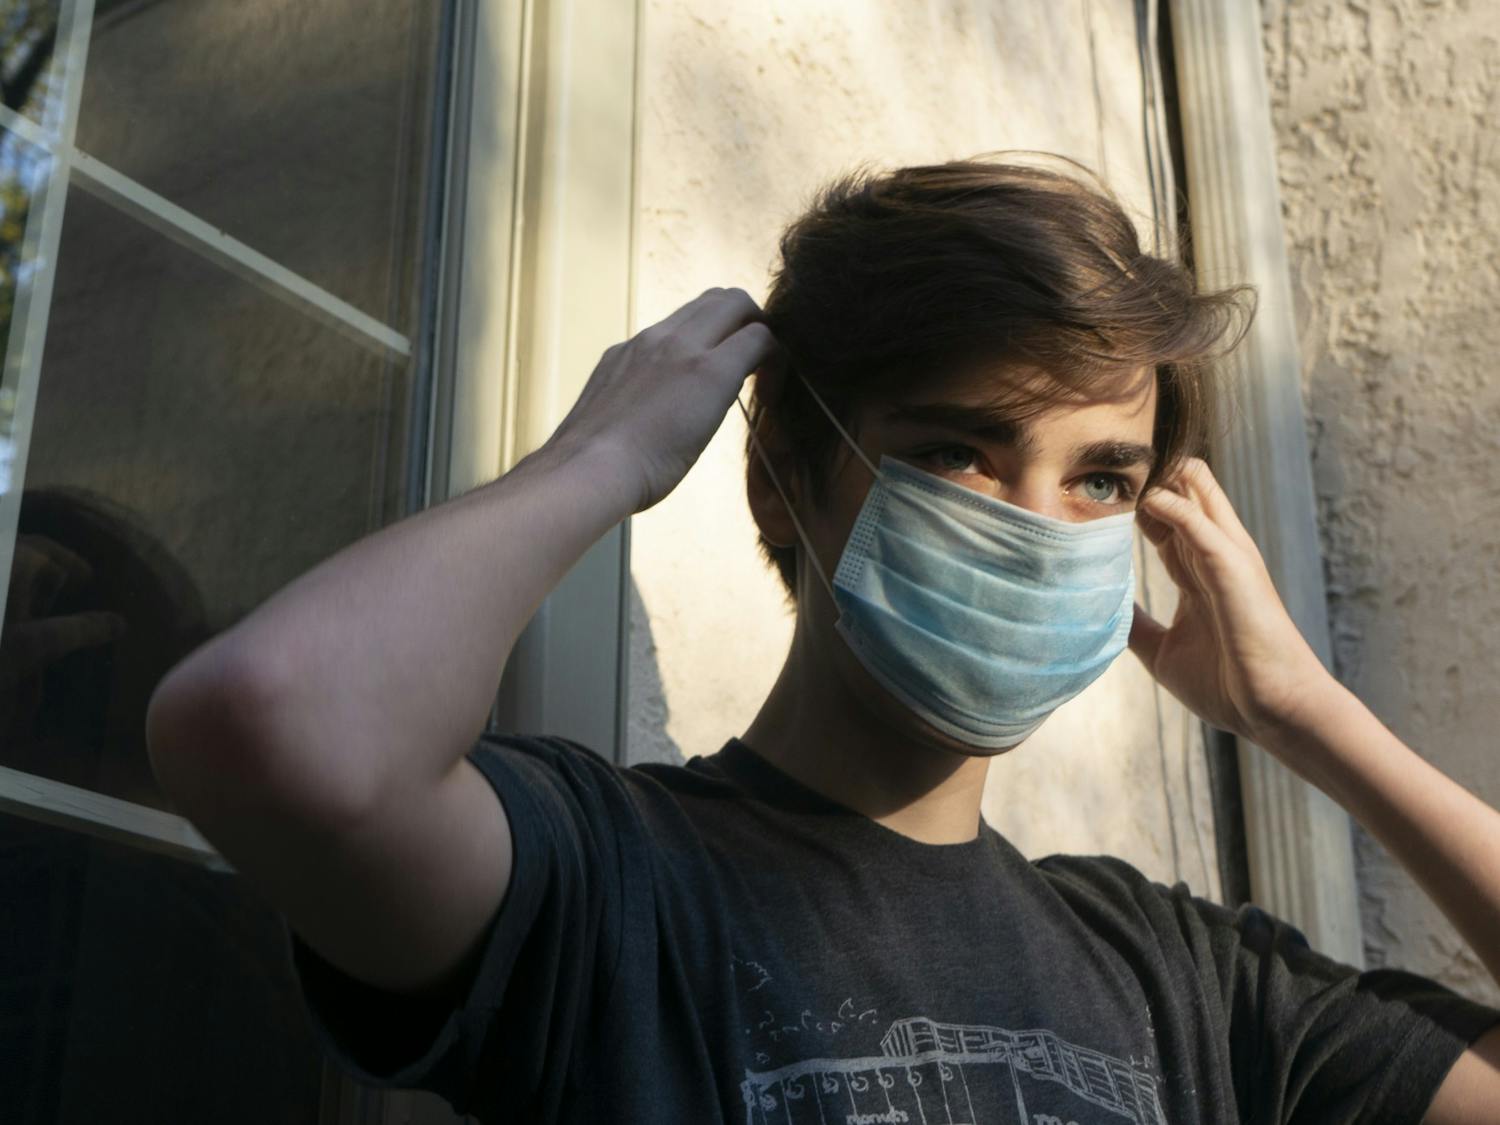 A student puts on a mask before leaving his house on Wednesday, May 20, 2020.